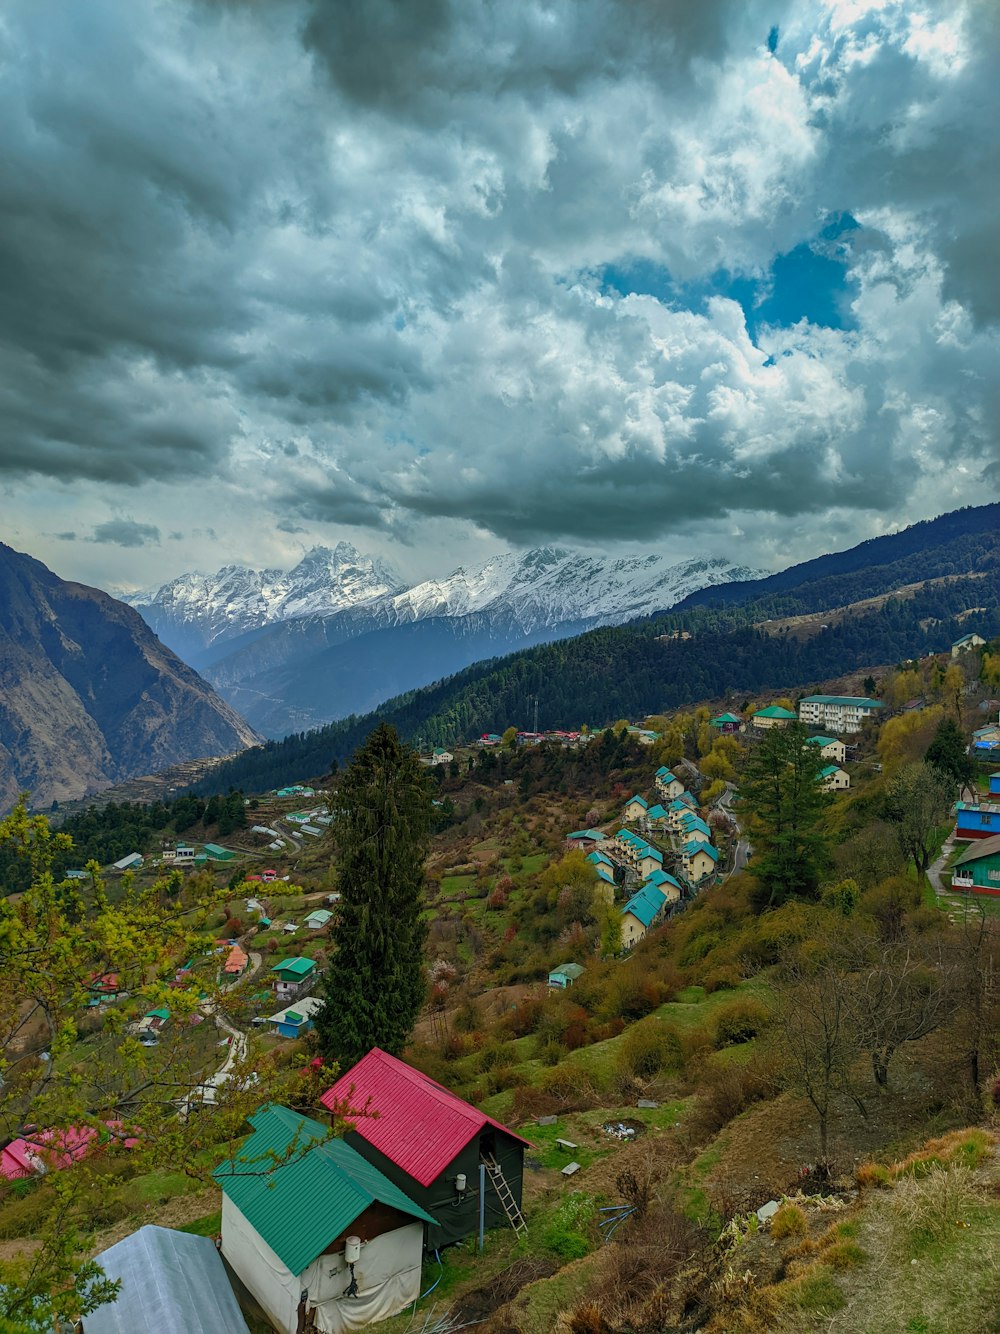 a view of a small village in the mountains